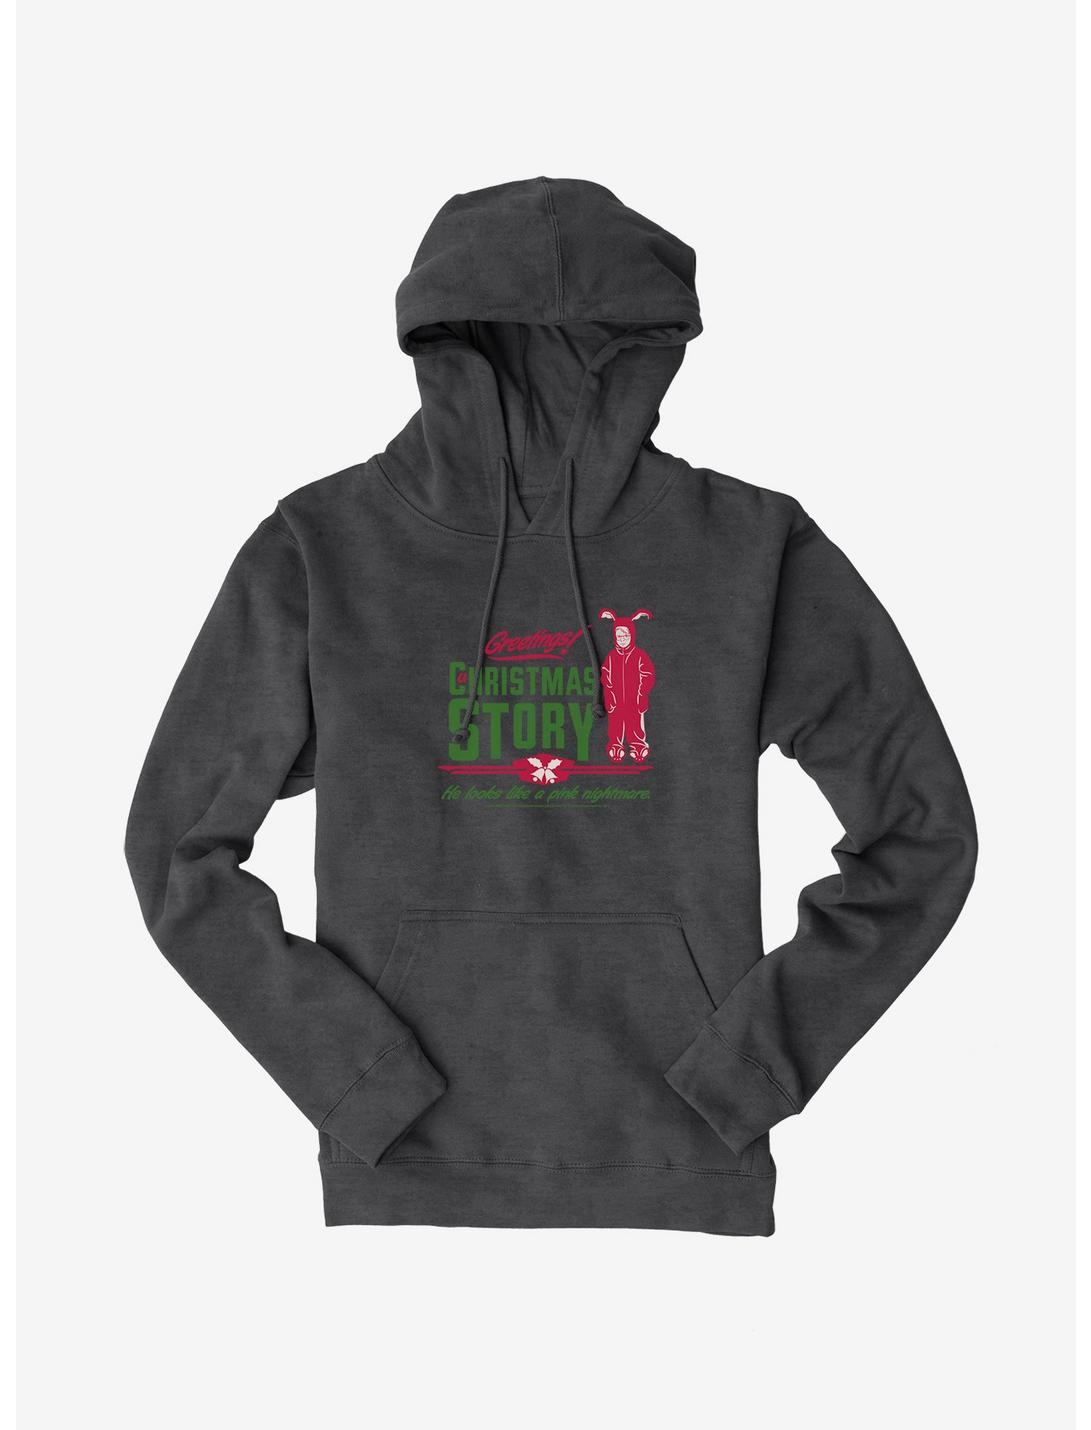 A Christmas Story  Pink Nightmare  Hoodie, CHARCOAL HEATHER, hi-res